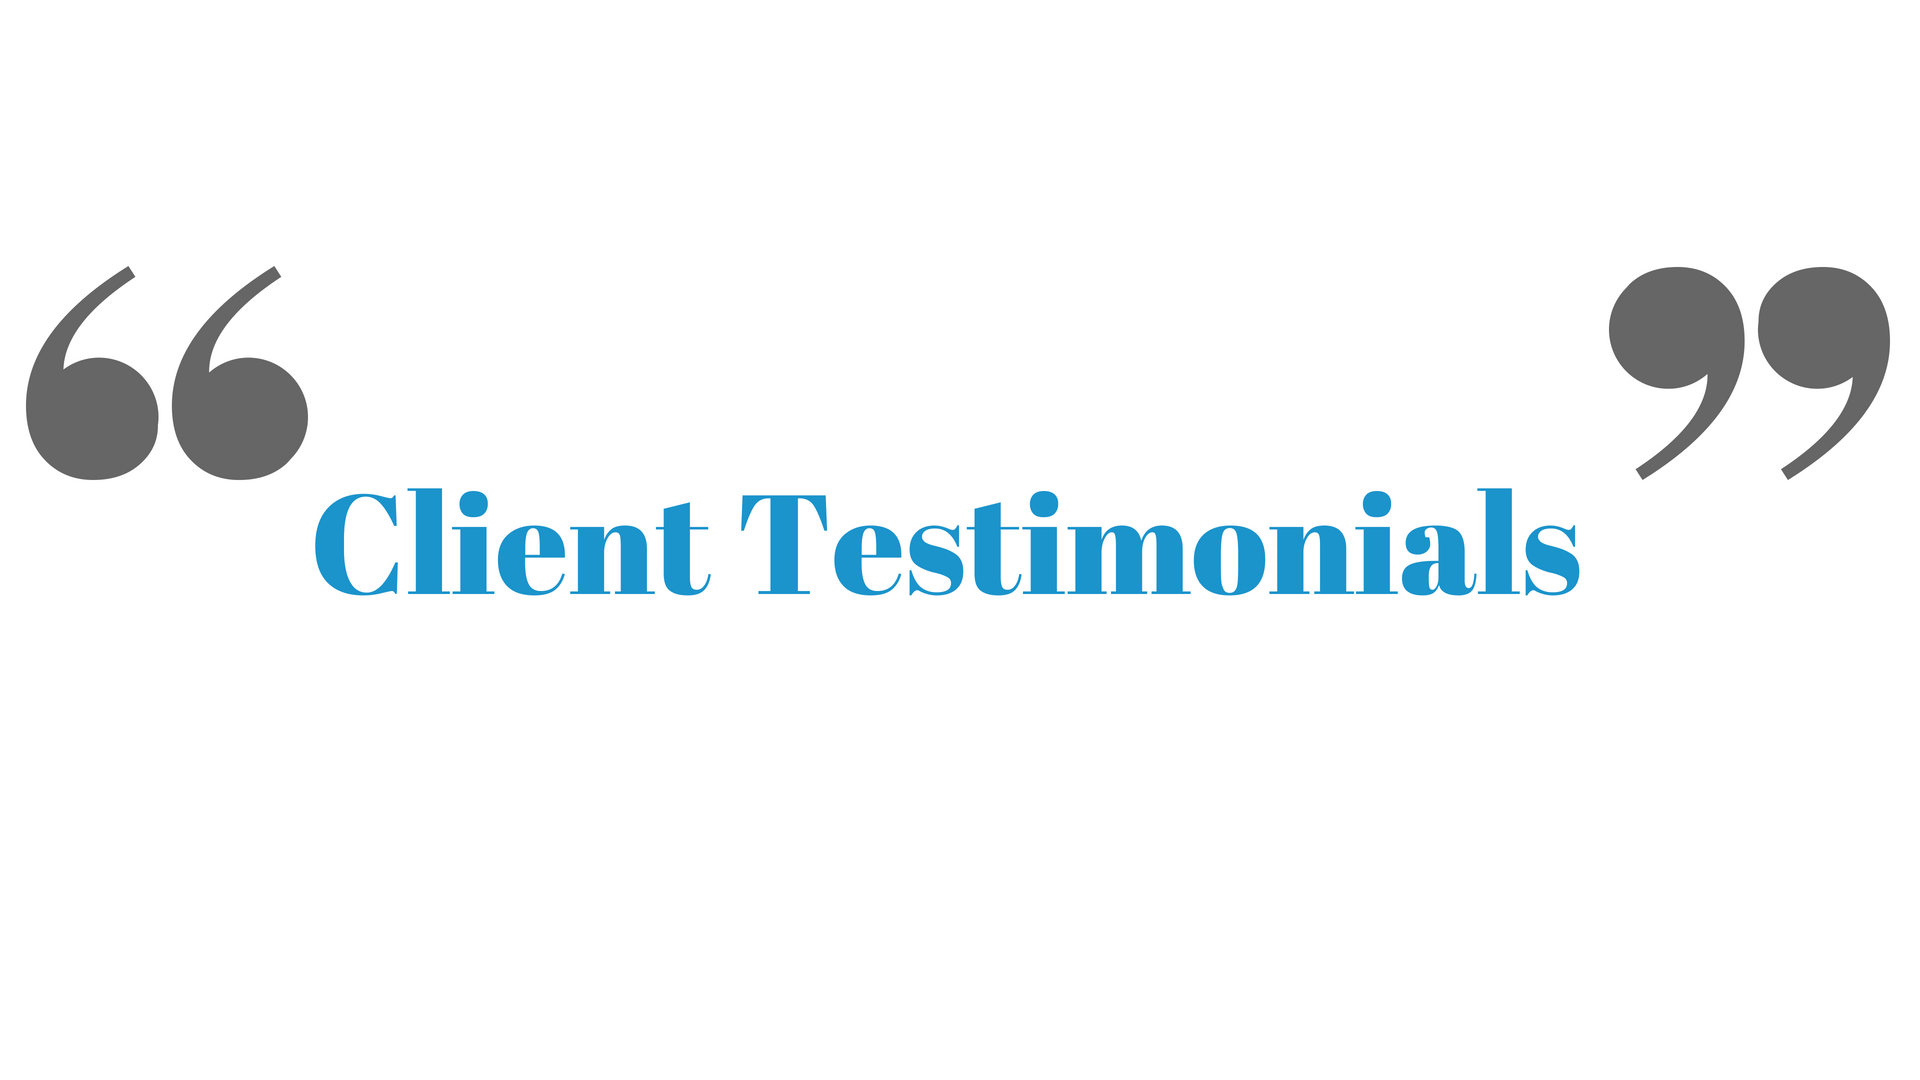 Driving Instructor near me | Finesse Driving Academy Testimonials